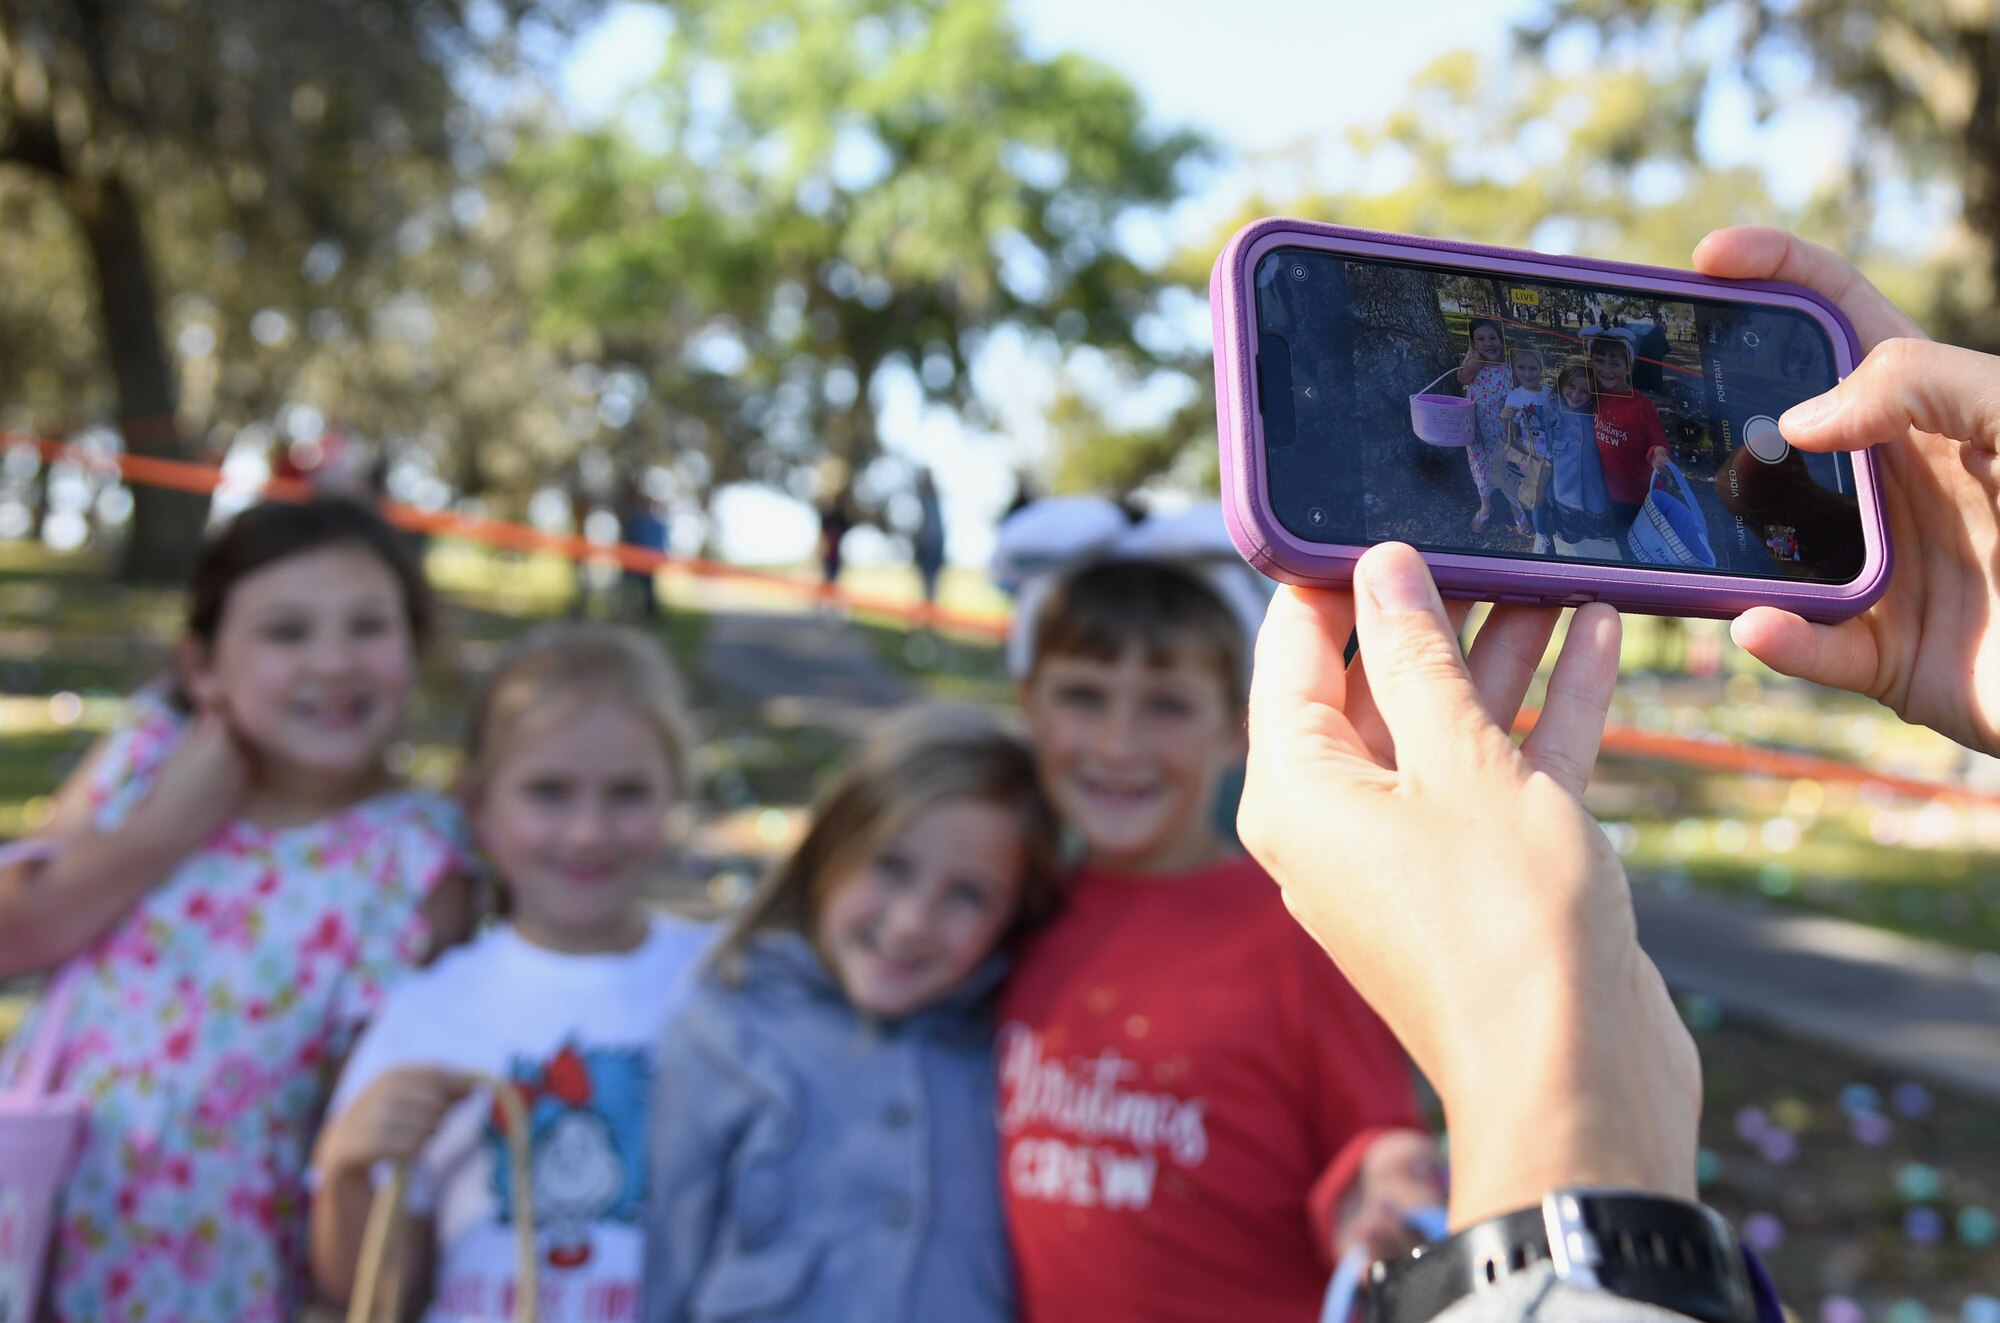 Lisa Crowley, wife of U.S. Air Force Col. Ryan Crowley, 81st Mission Support Group commander, takes a photo of her son and his friends during Keesler's Eggstravaganza at the marina park at Keesler Air Force Base, Mississippi, April 9, 2022. The 81st Force Support Squadron hosted the event for military children. (U.S. Air Force photo by Kemberly Groue)